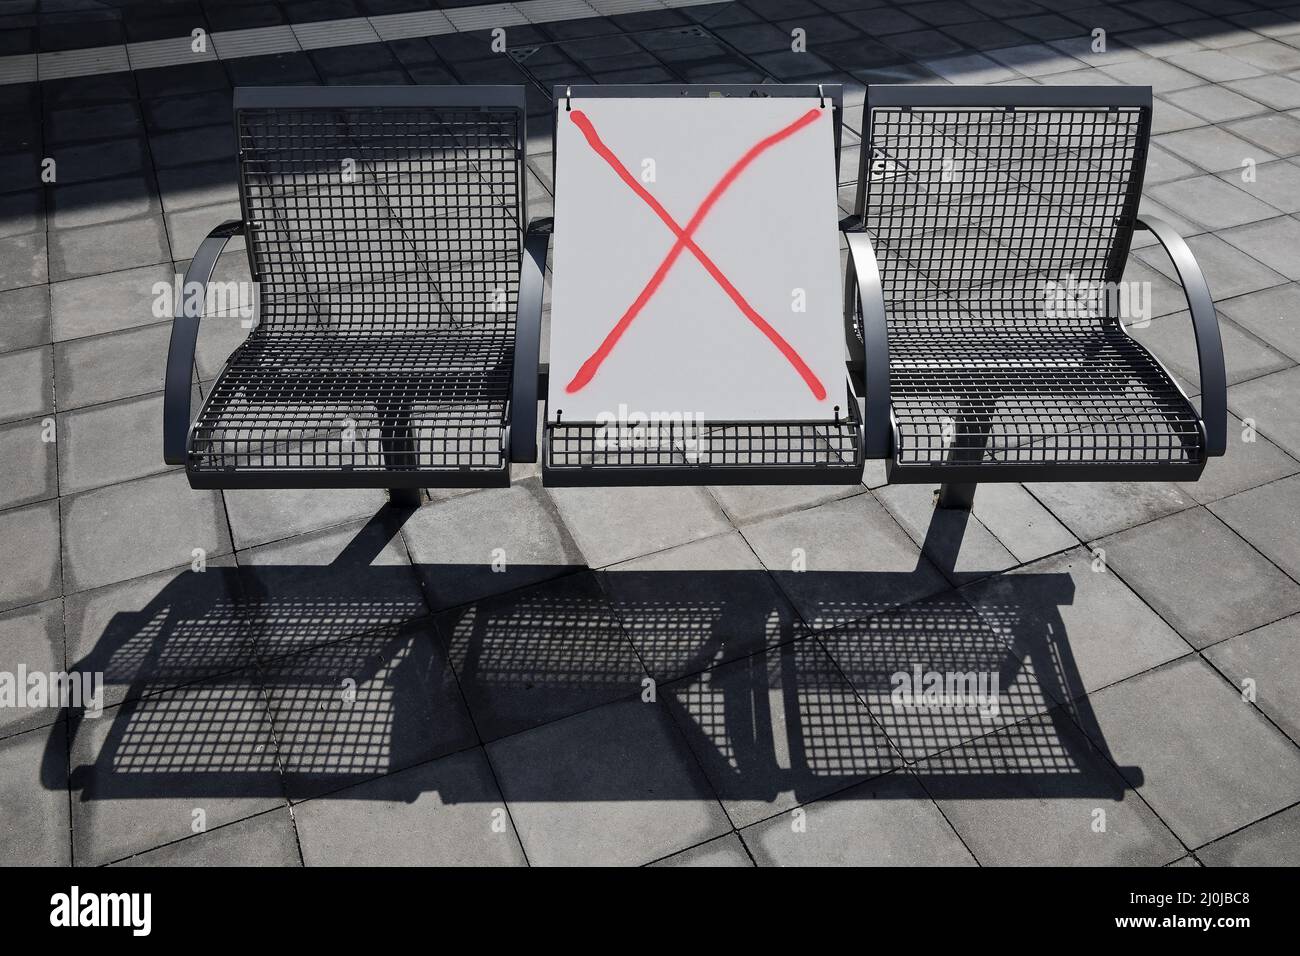 Corona distance rule on a bench in public space in spring 2021, Central Bus Station, Berlin, Germany Stock Photo